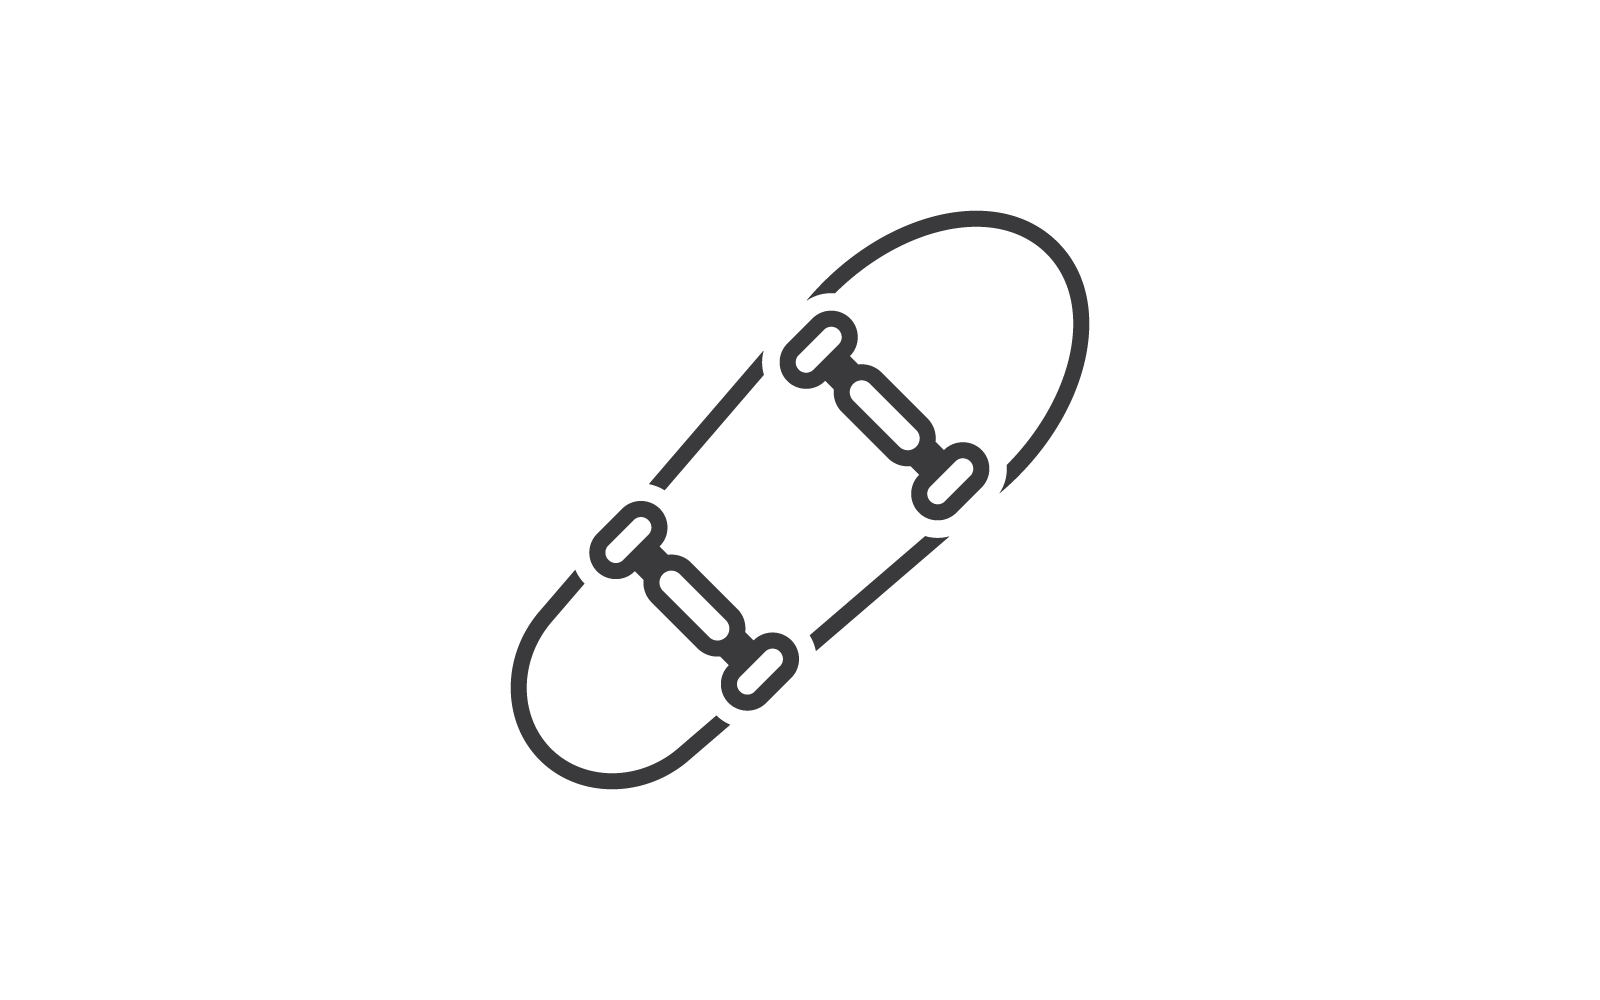 Skateboard icon illustration vector flat design is the logo and icon for sports skater entertainment Logo Template